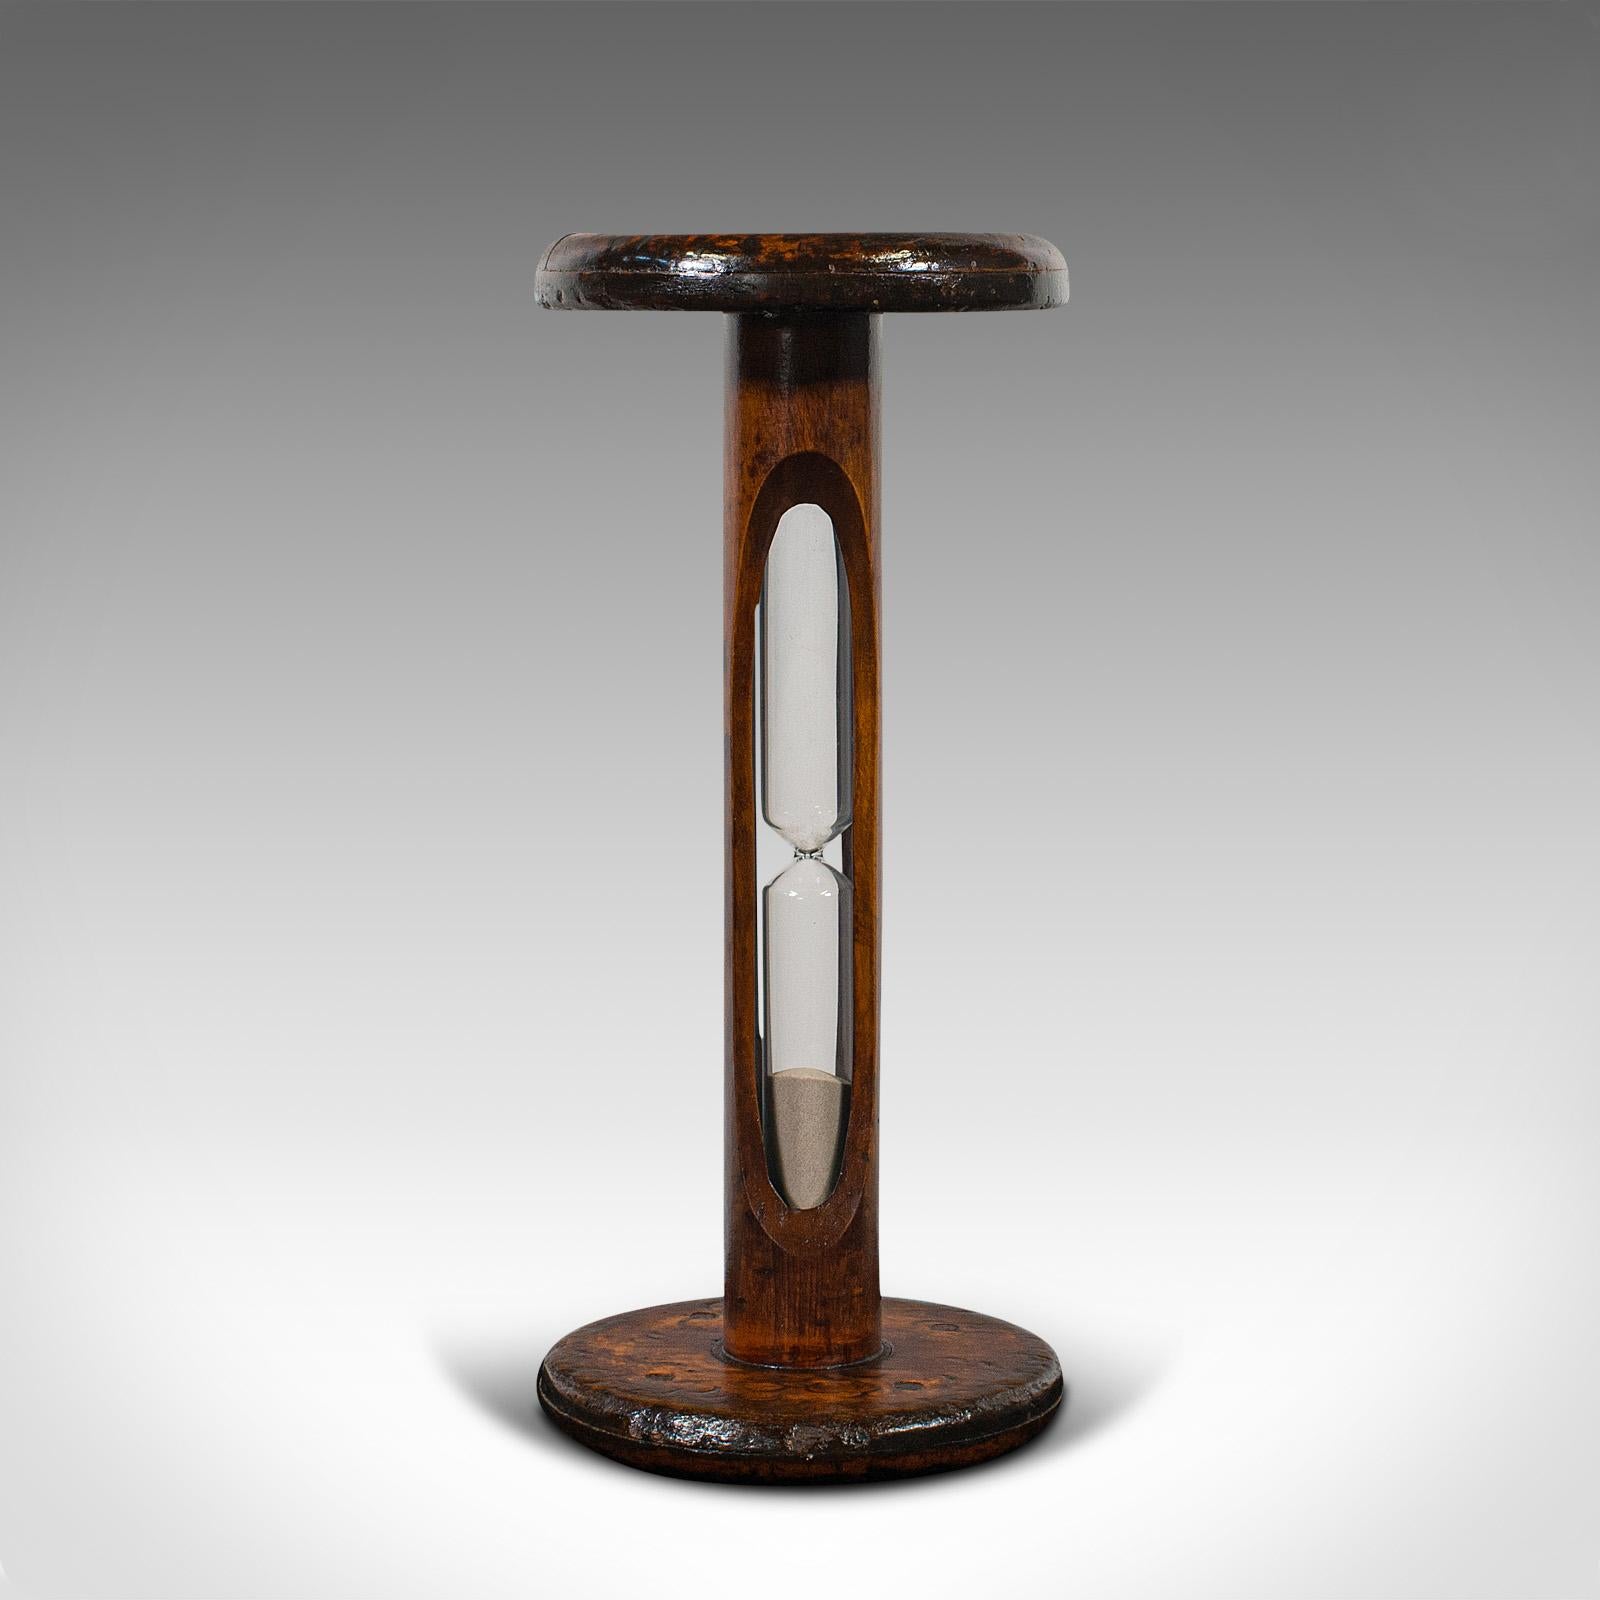 This is an antique cookie baking timer. An English, fruitwood spool and glass 10 minute sand timer, dating to the Victorian period and later, circa 1900.

Charming timer set within an antique spool
Displays a desirable aged patina